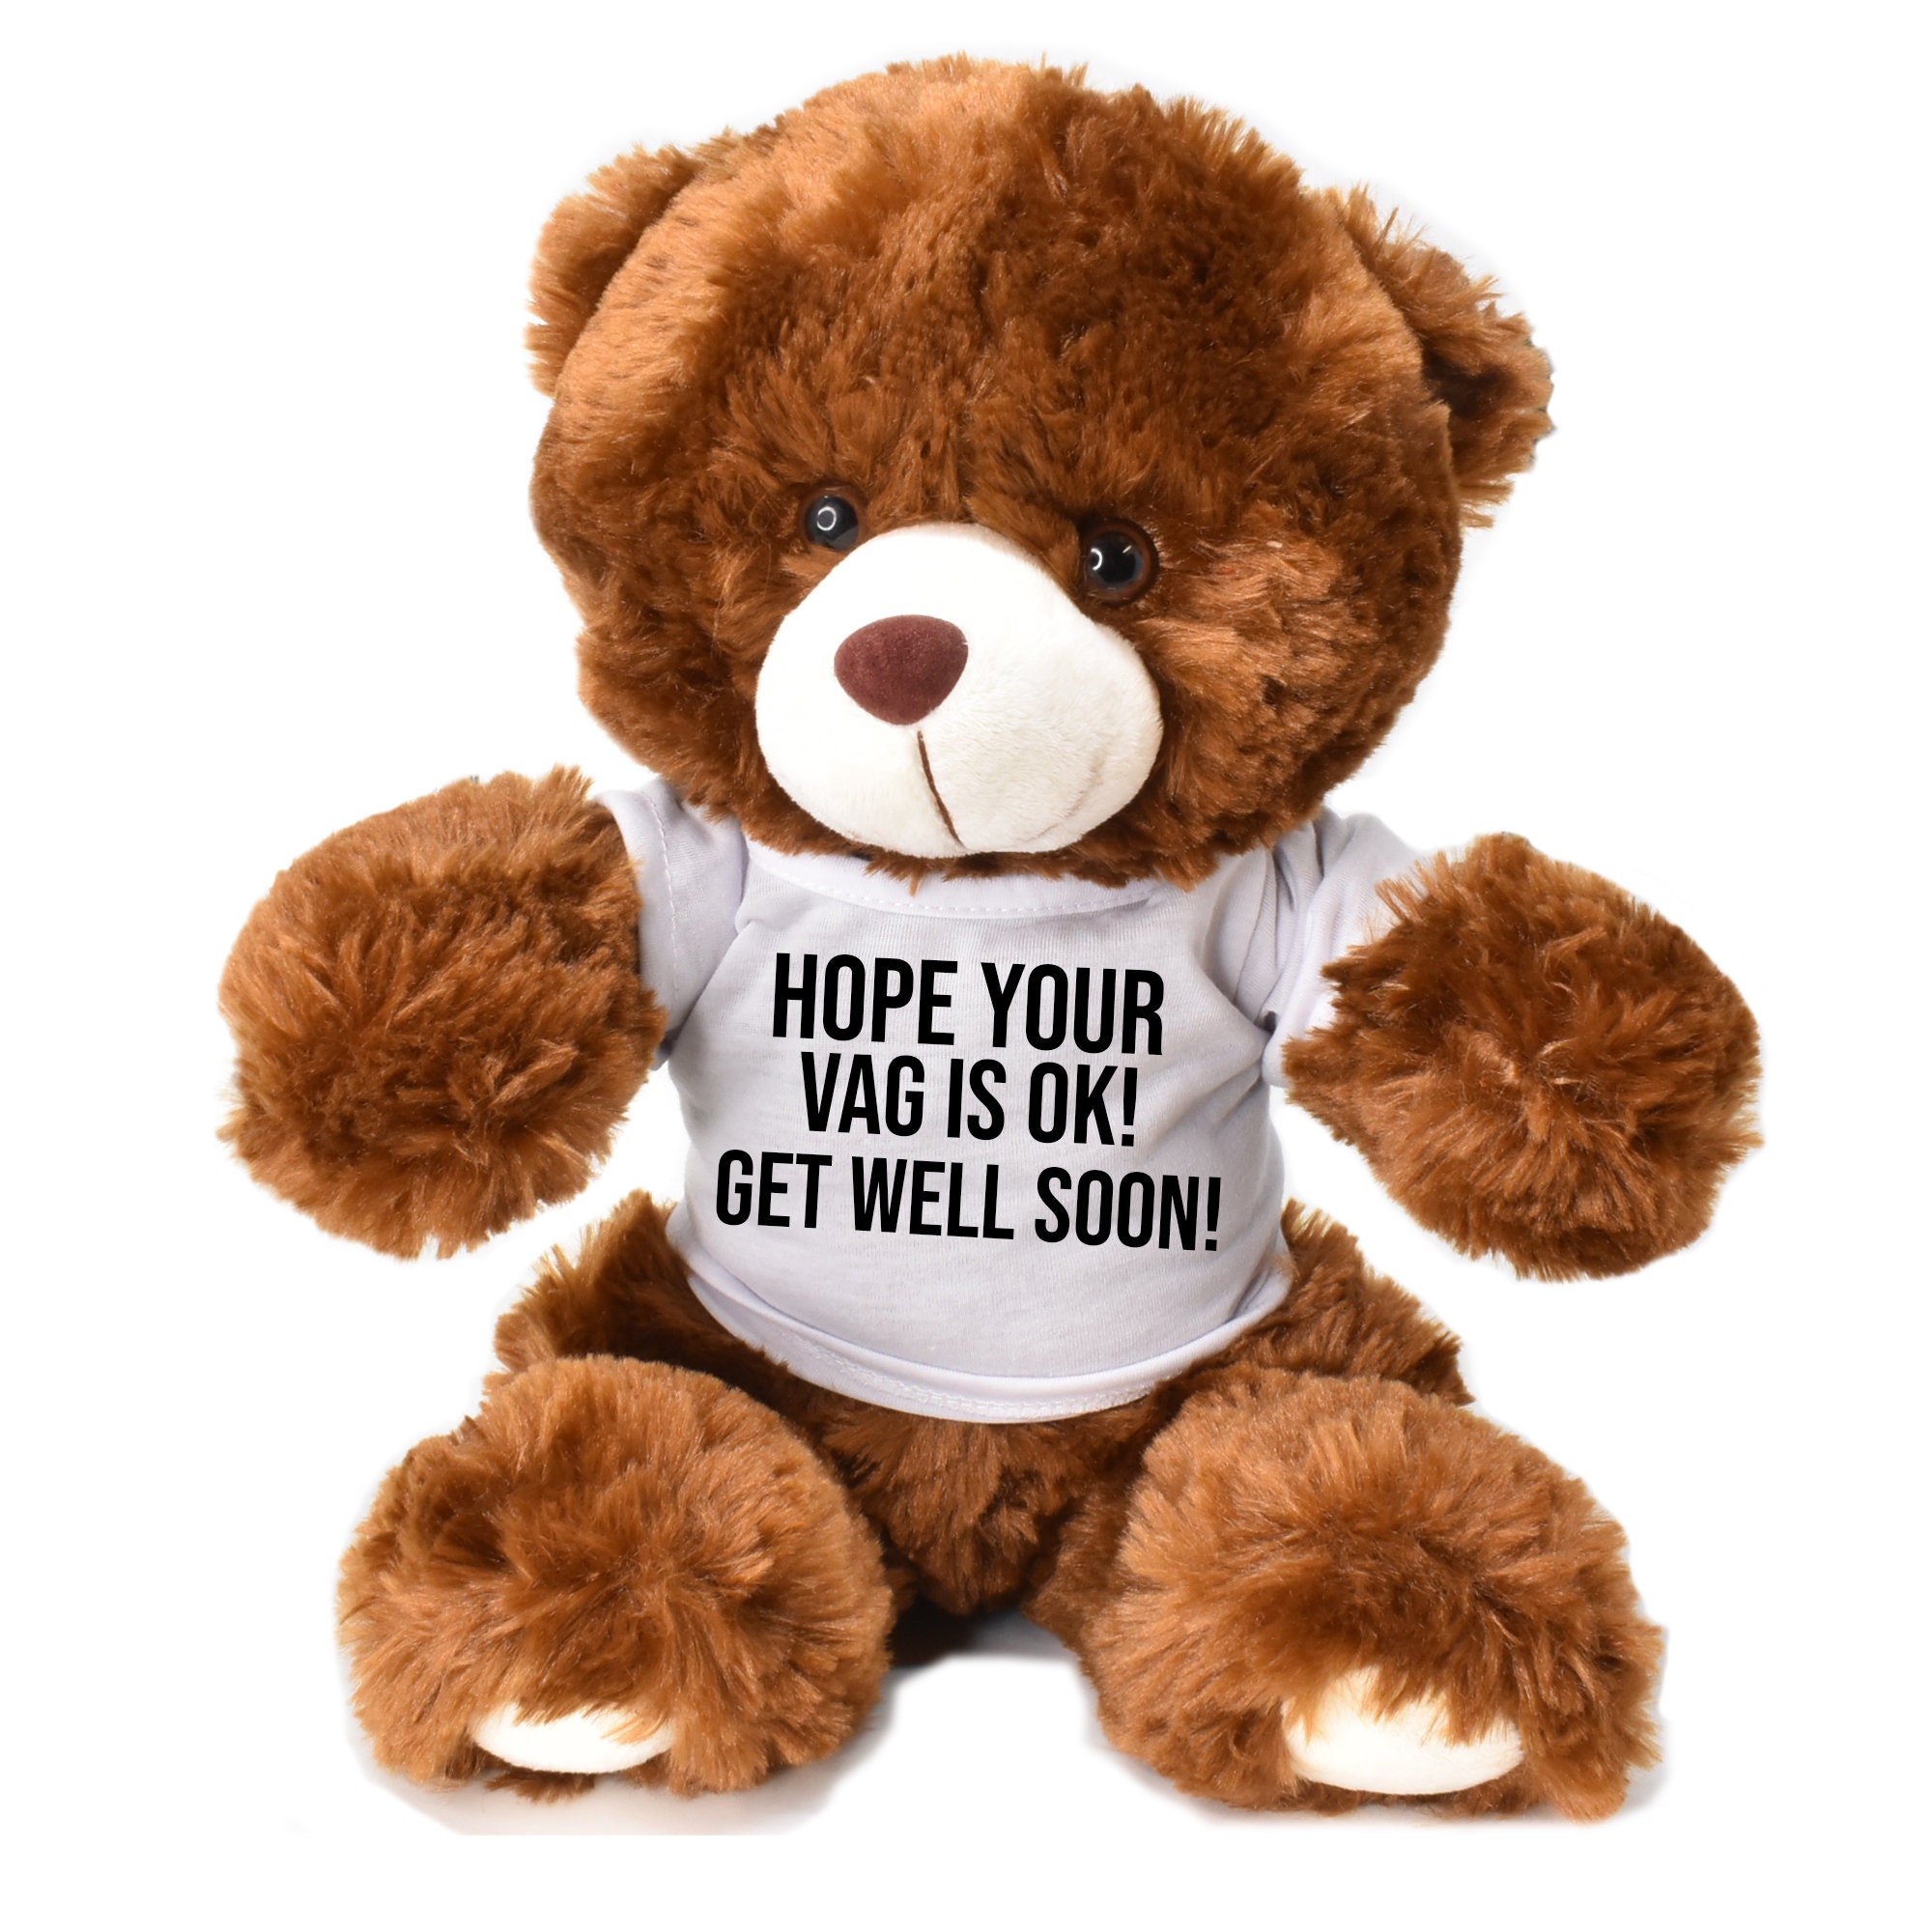 Get Well Soon Bear Embroidery Design